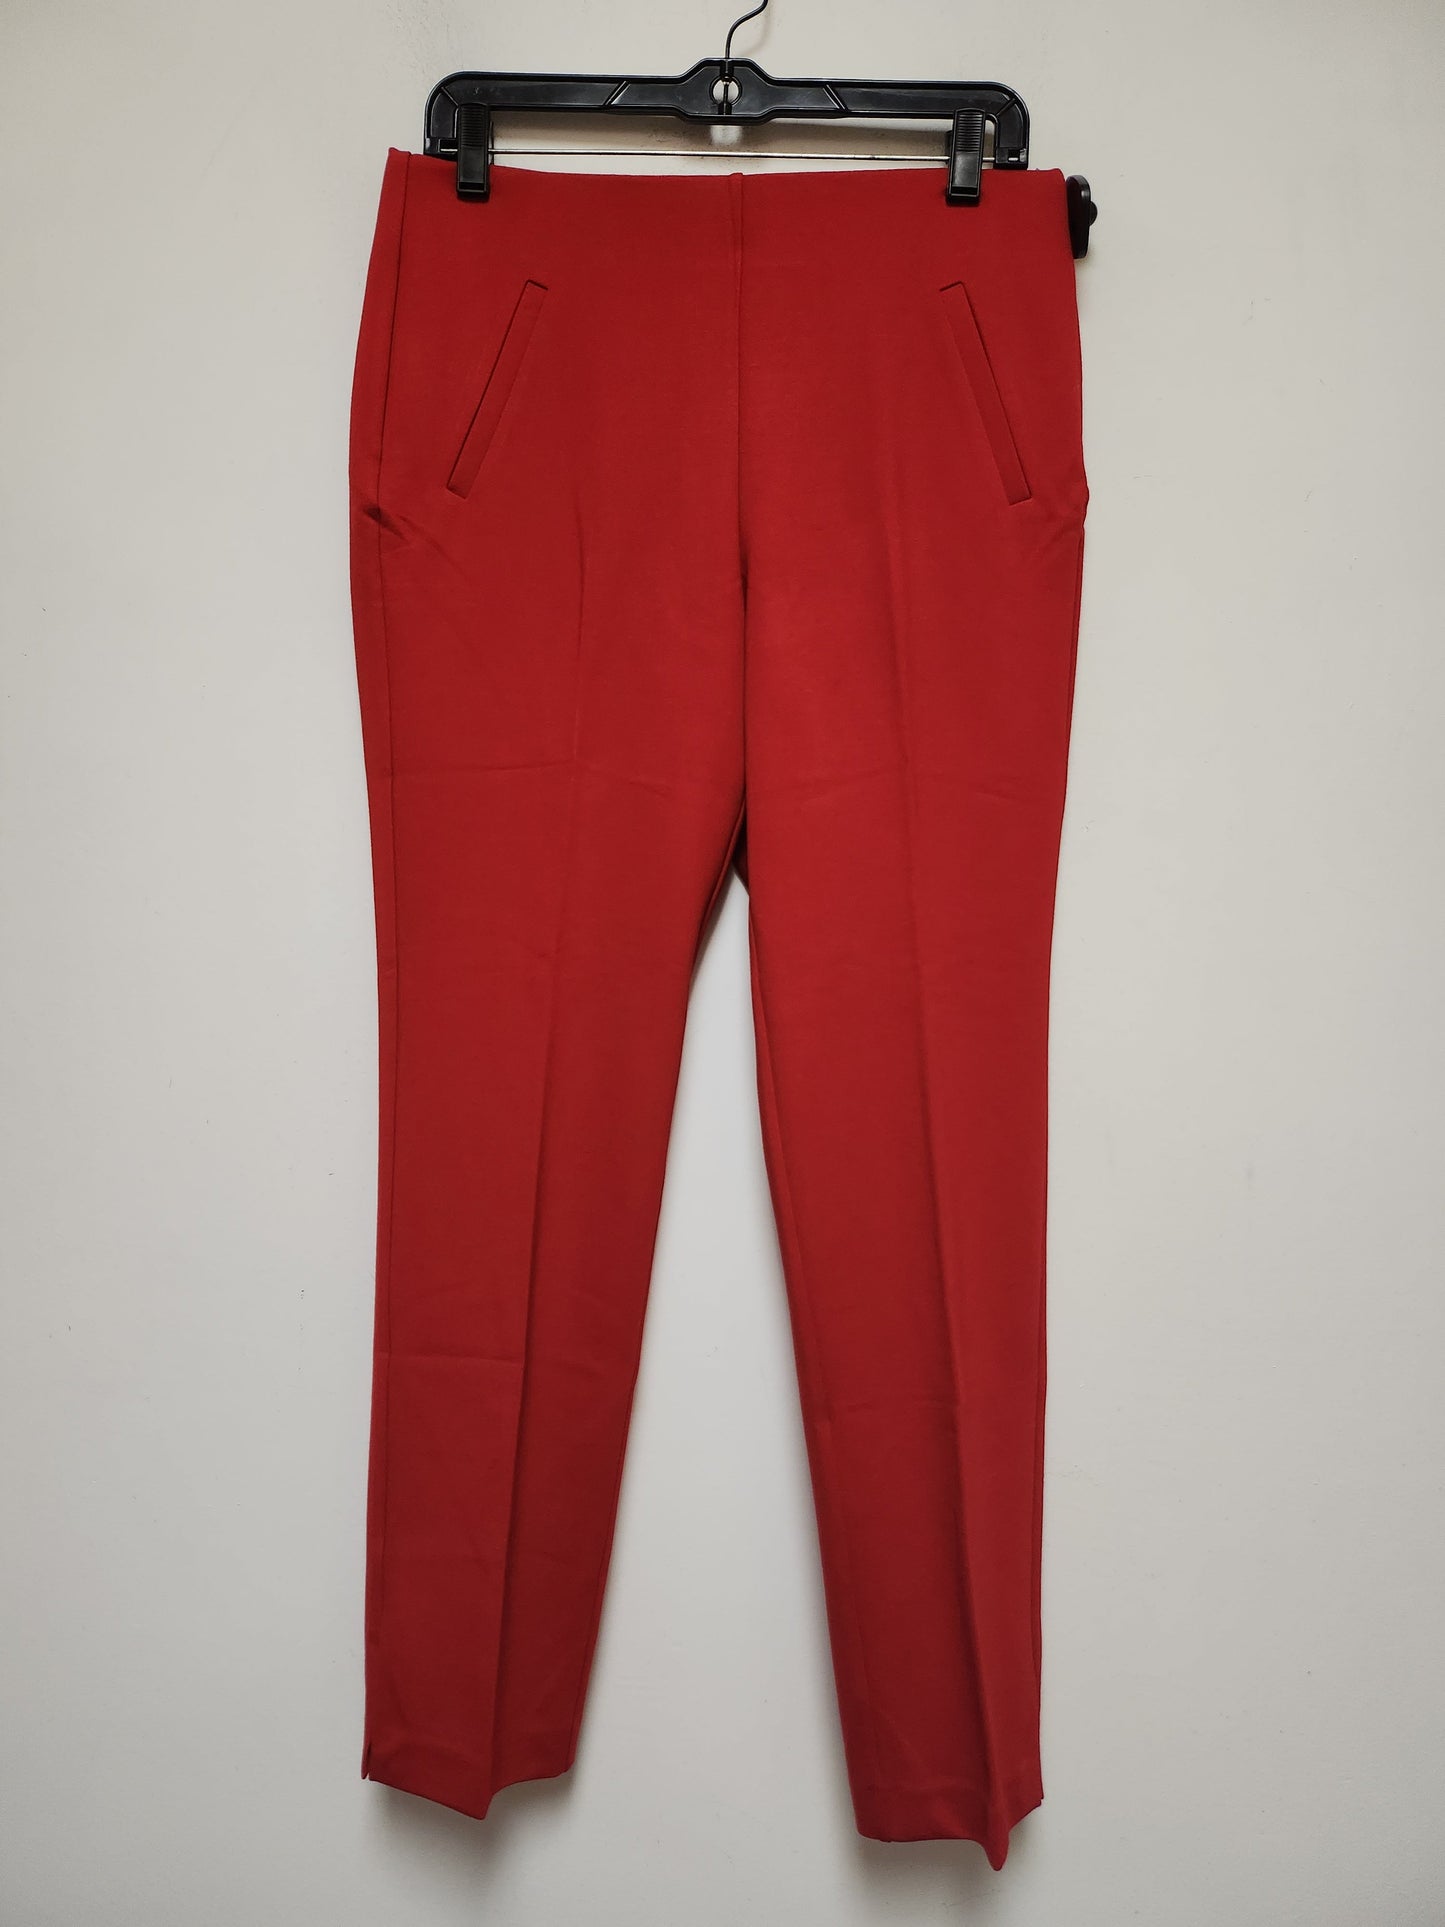 Red Pants Leggings Chicos, Size 6